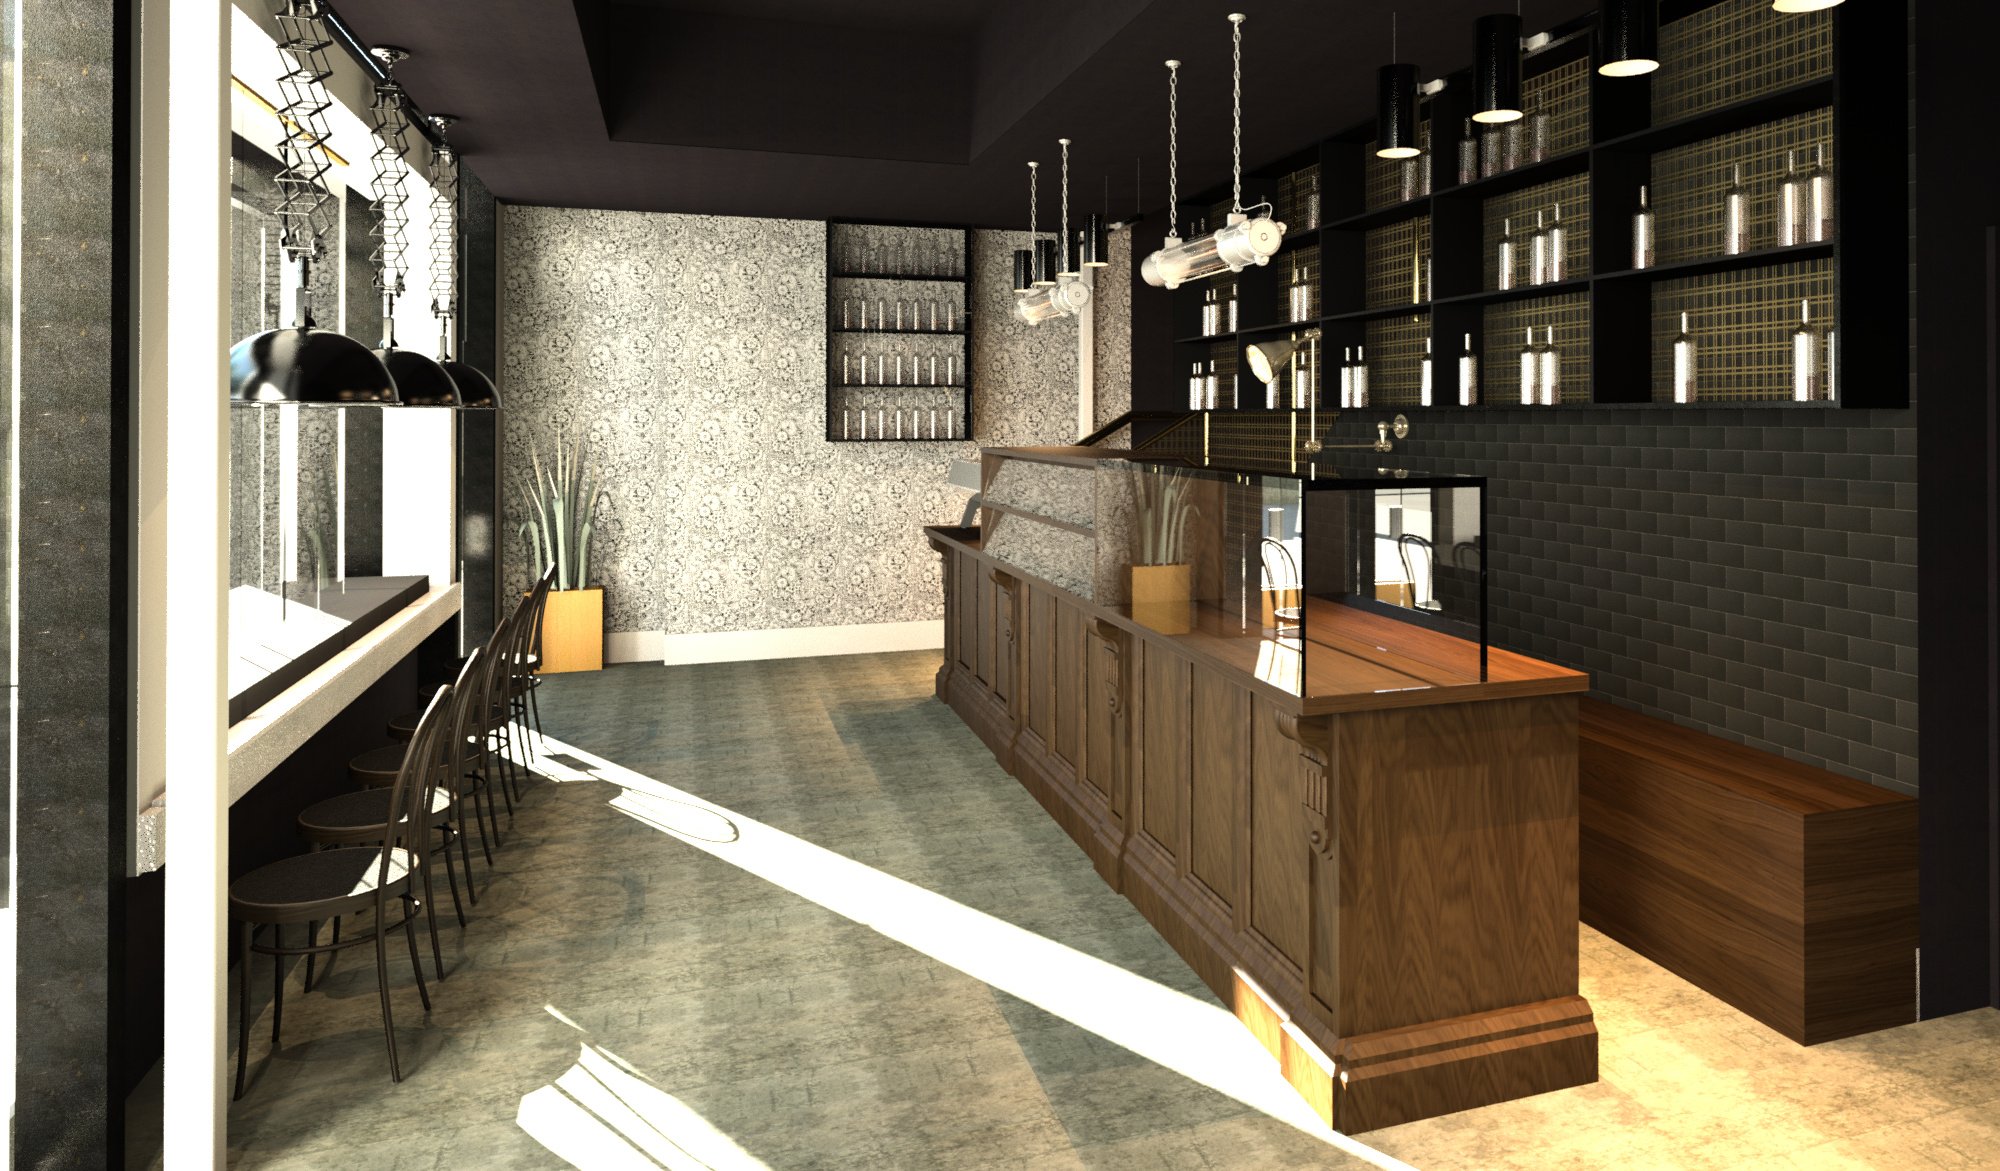 Steampunk Cafe Project Designed